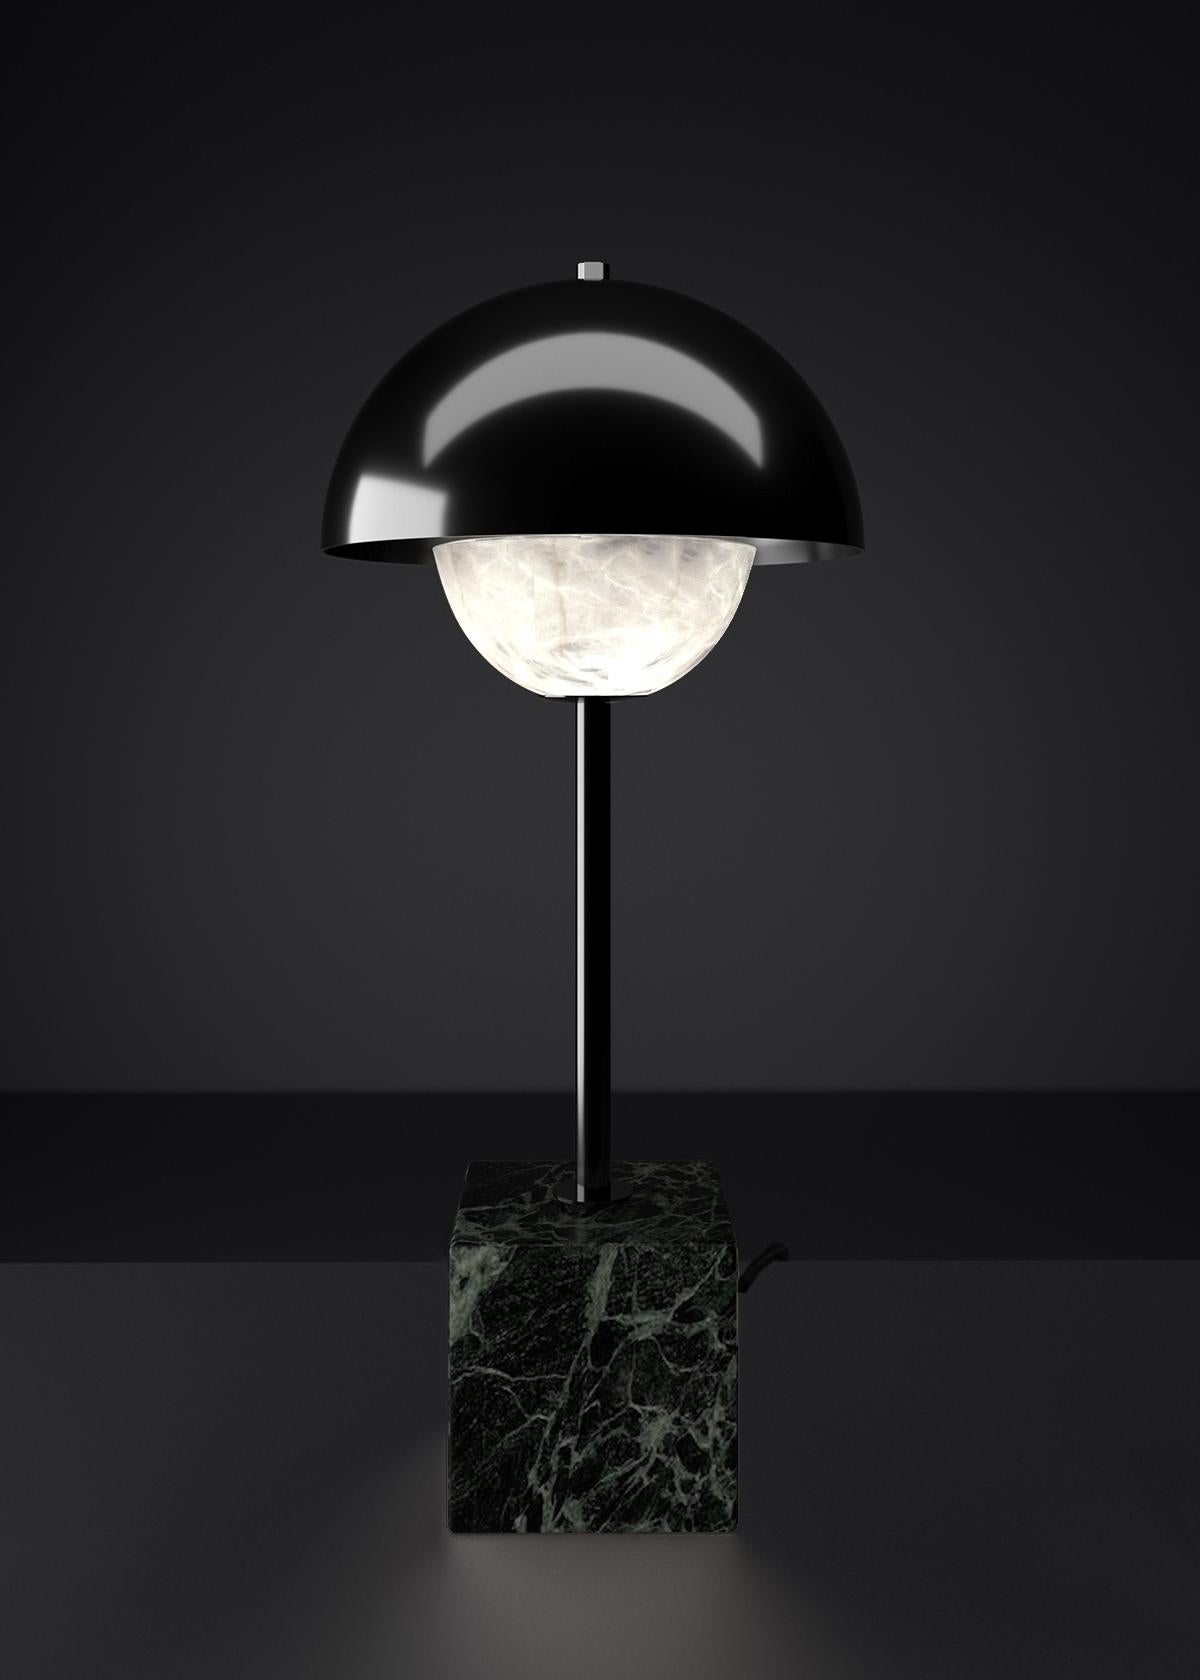 Apollo Shiny Black Metal Table Lamp by Alabastro Italiano
Dimensions: D 30 x W 30 x H 74 cm.
Materials: White alabaster, Nero Marquinia marble, black silk cables and metal.

Available in different finishes: Shiny Silver, Bronze, Brushed Brass,